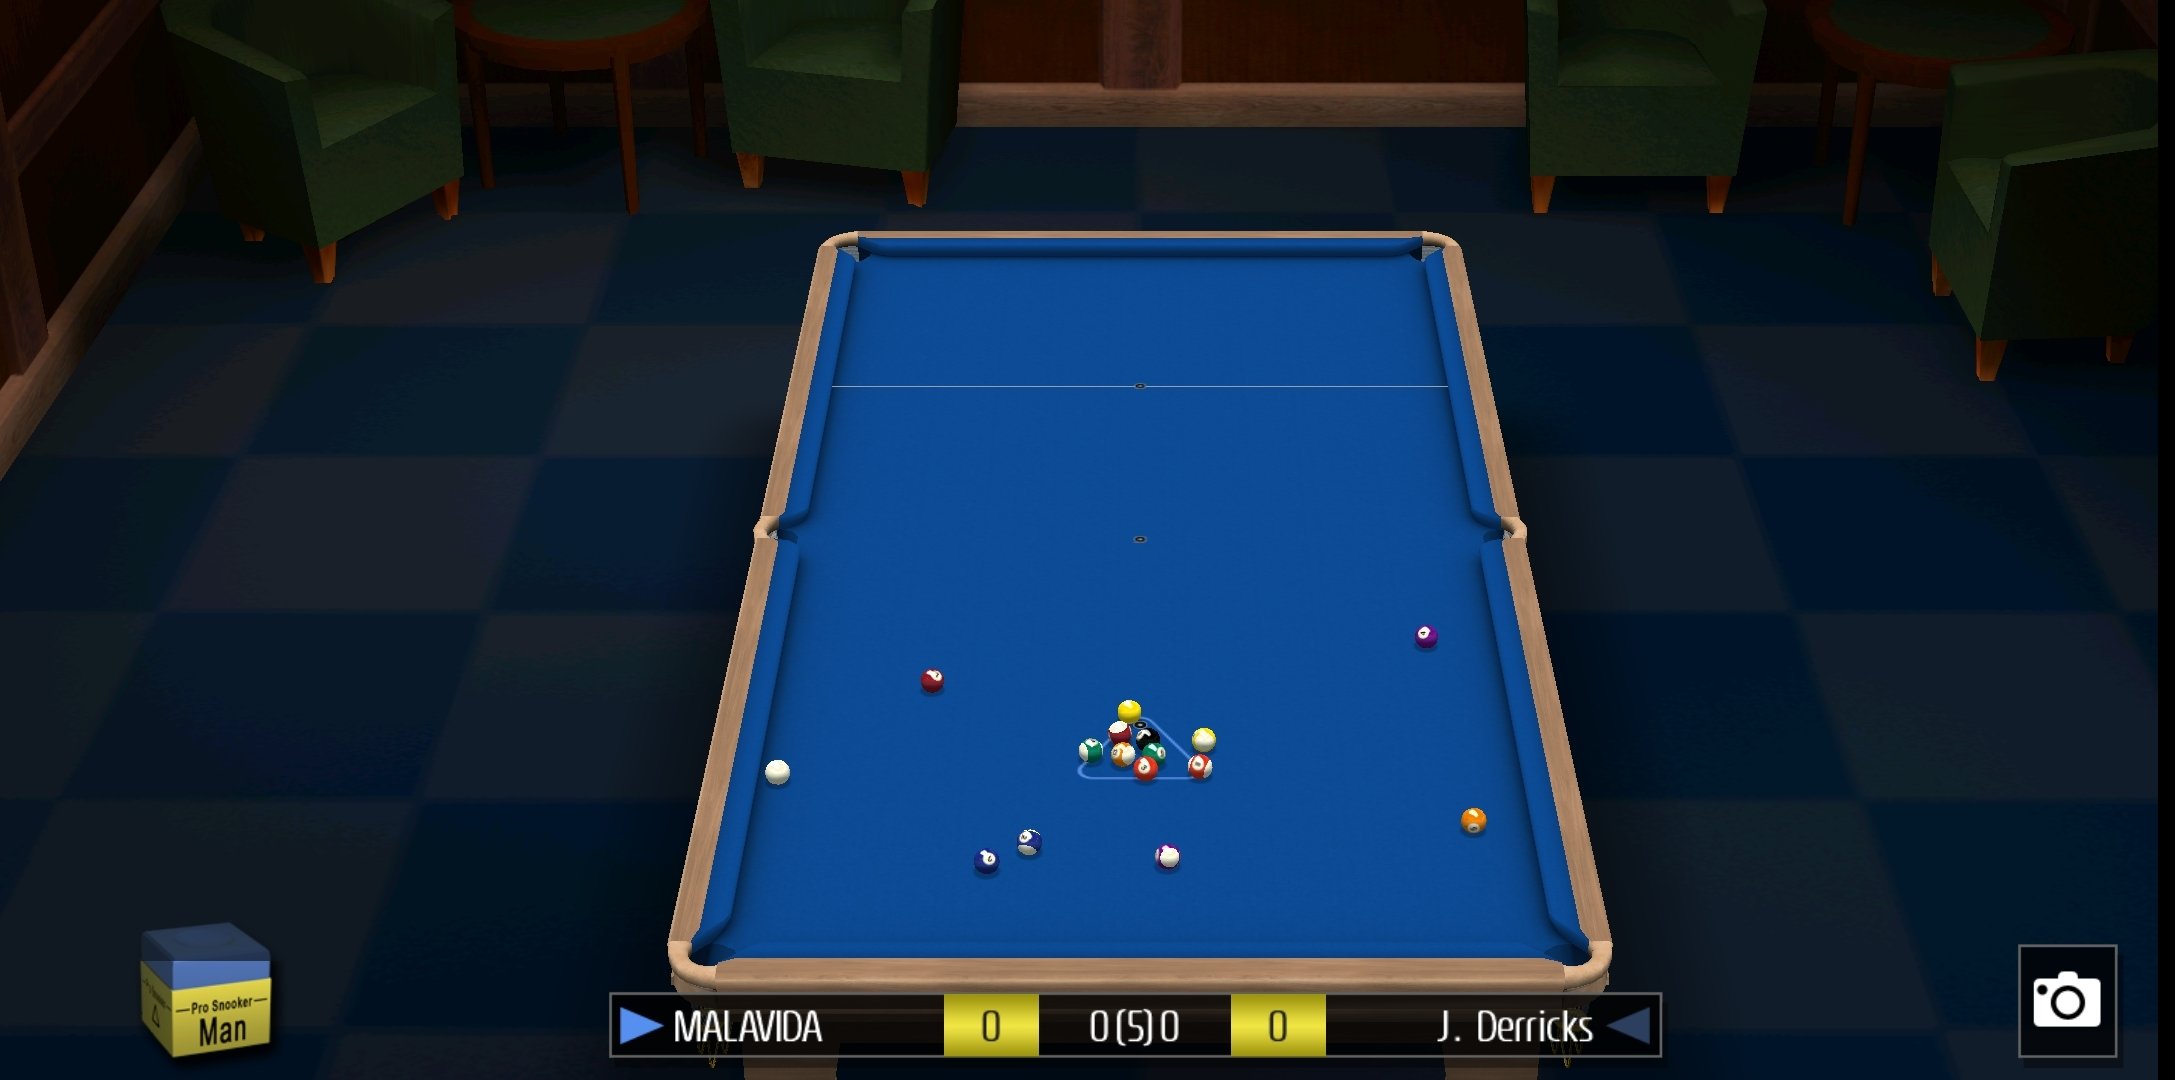 Pro Snooker 2024 APK Download for Android Free